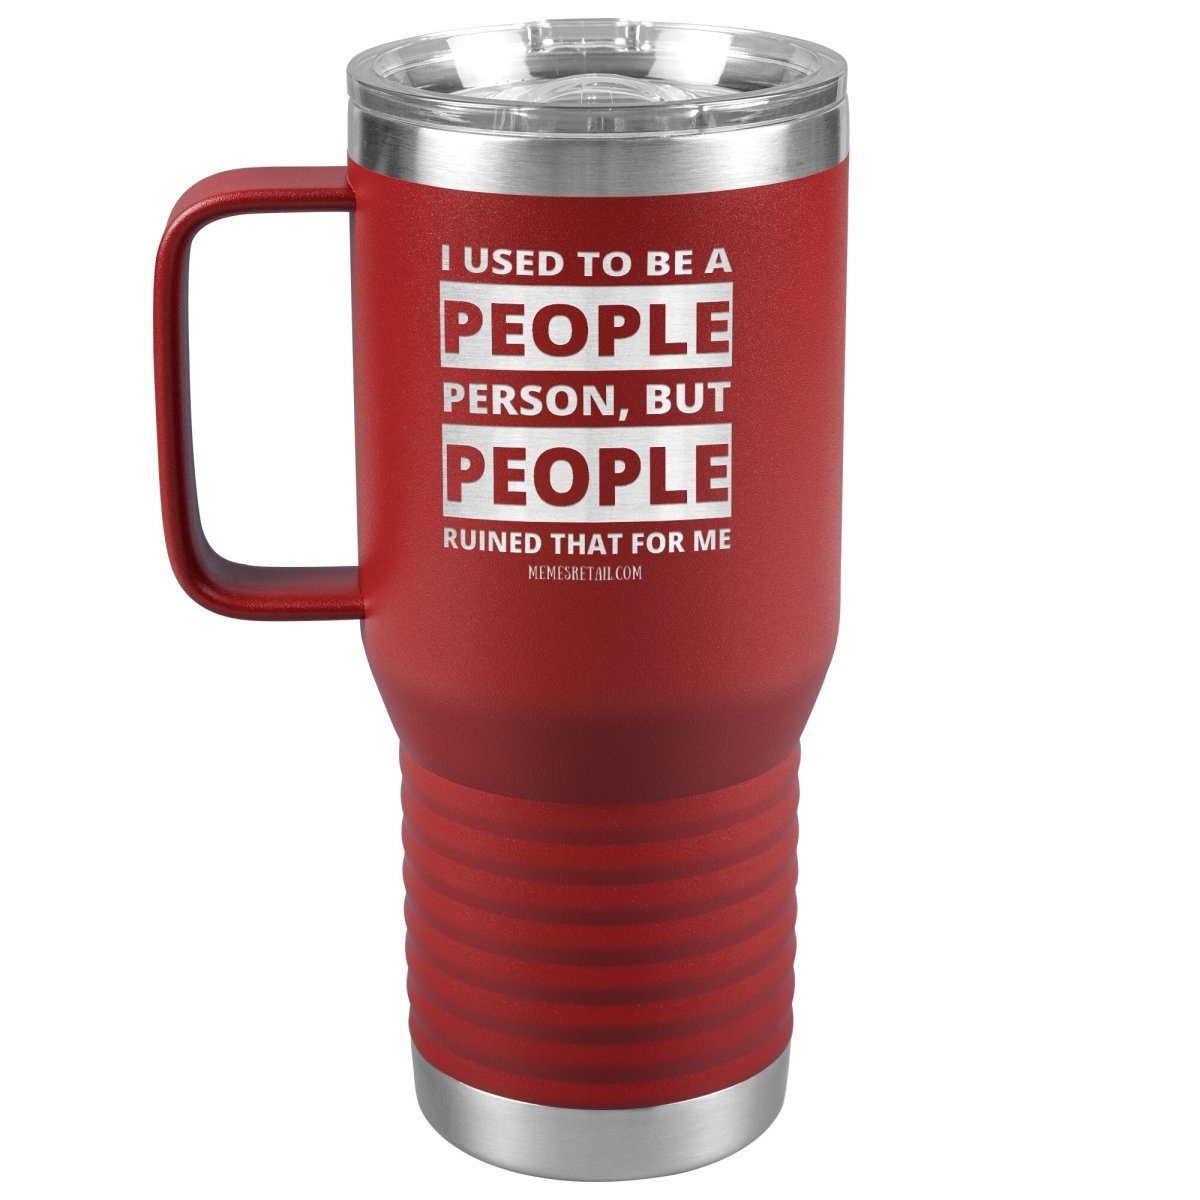 I Used To Be A People Person, But People Ruined That For Me Tumblers, 20oz Travel Tumbler / Red - MemesRetail.com